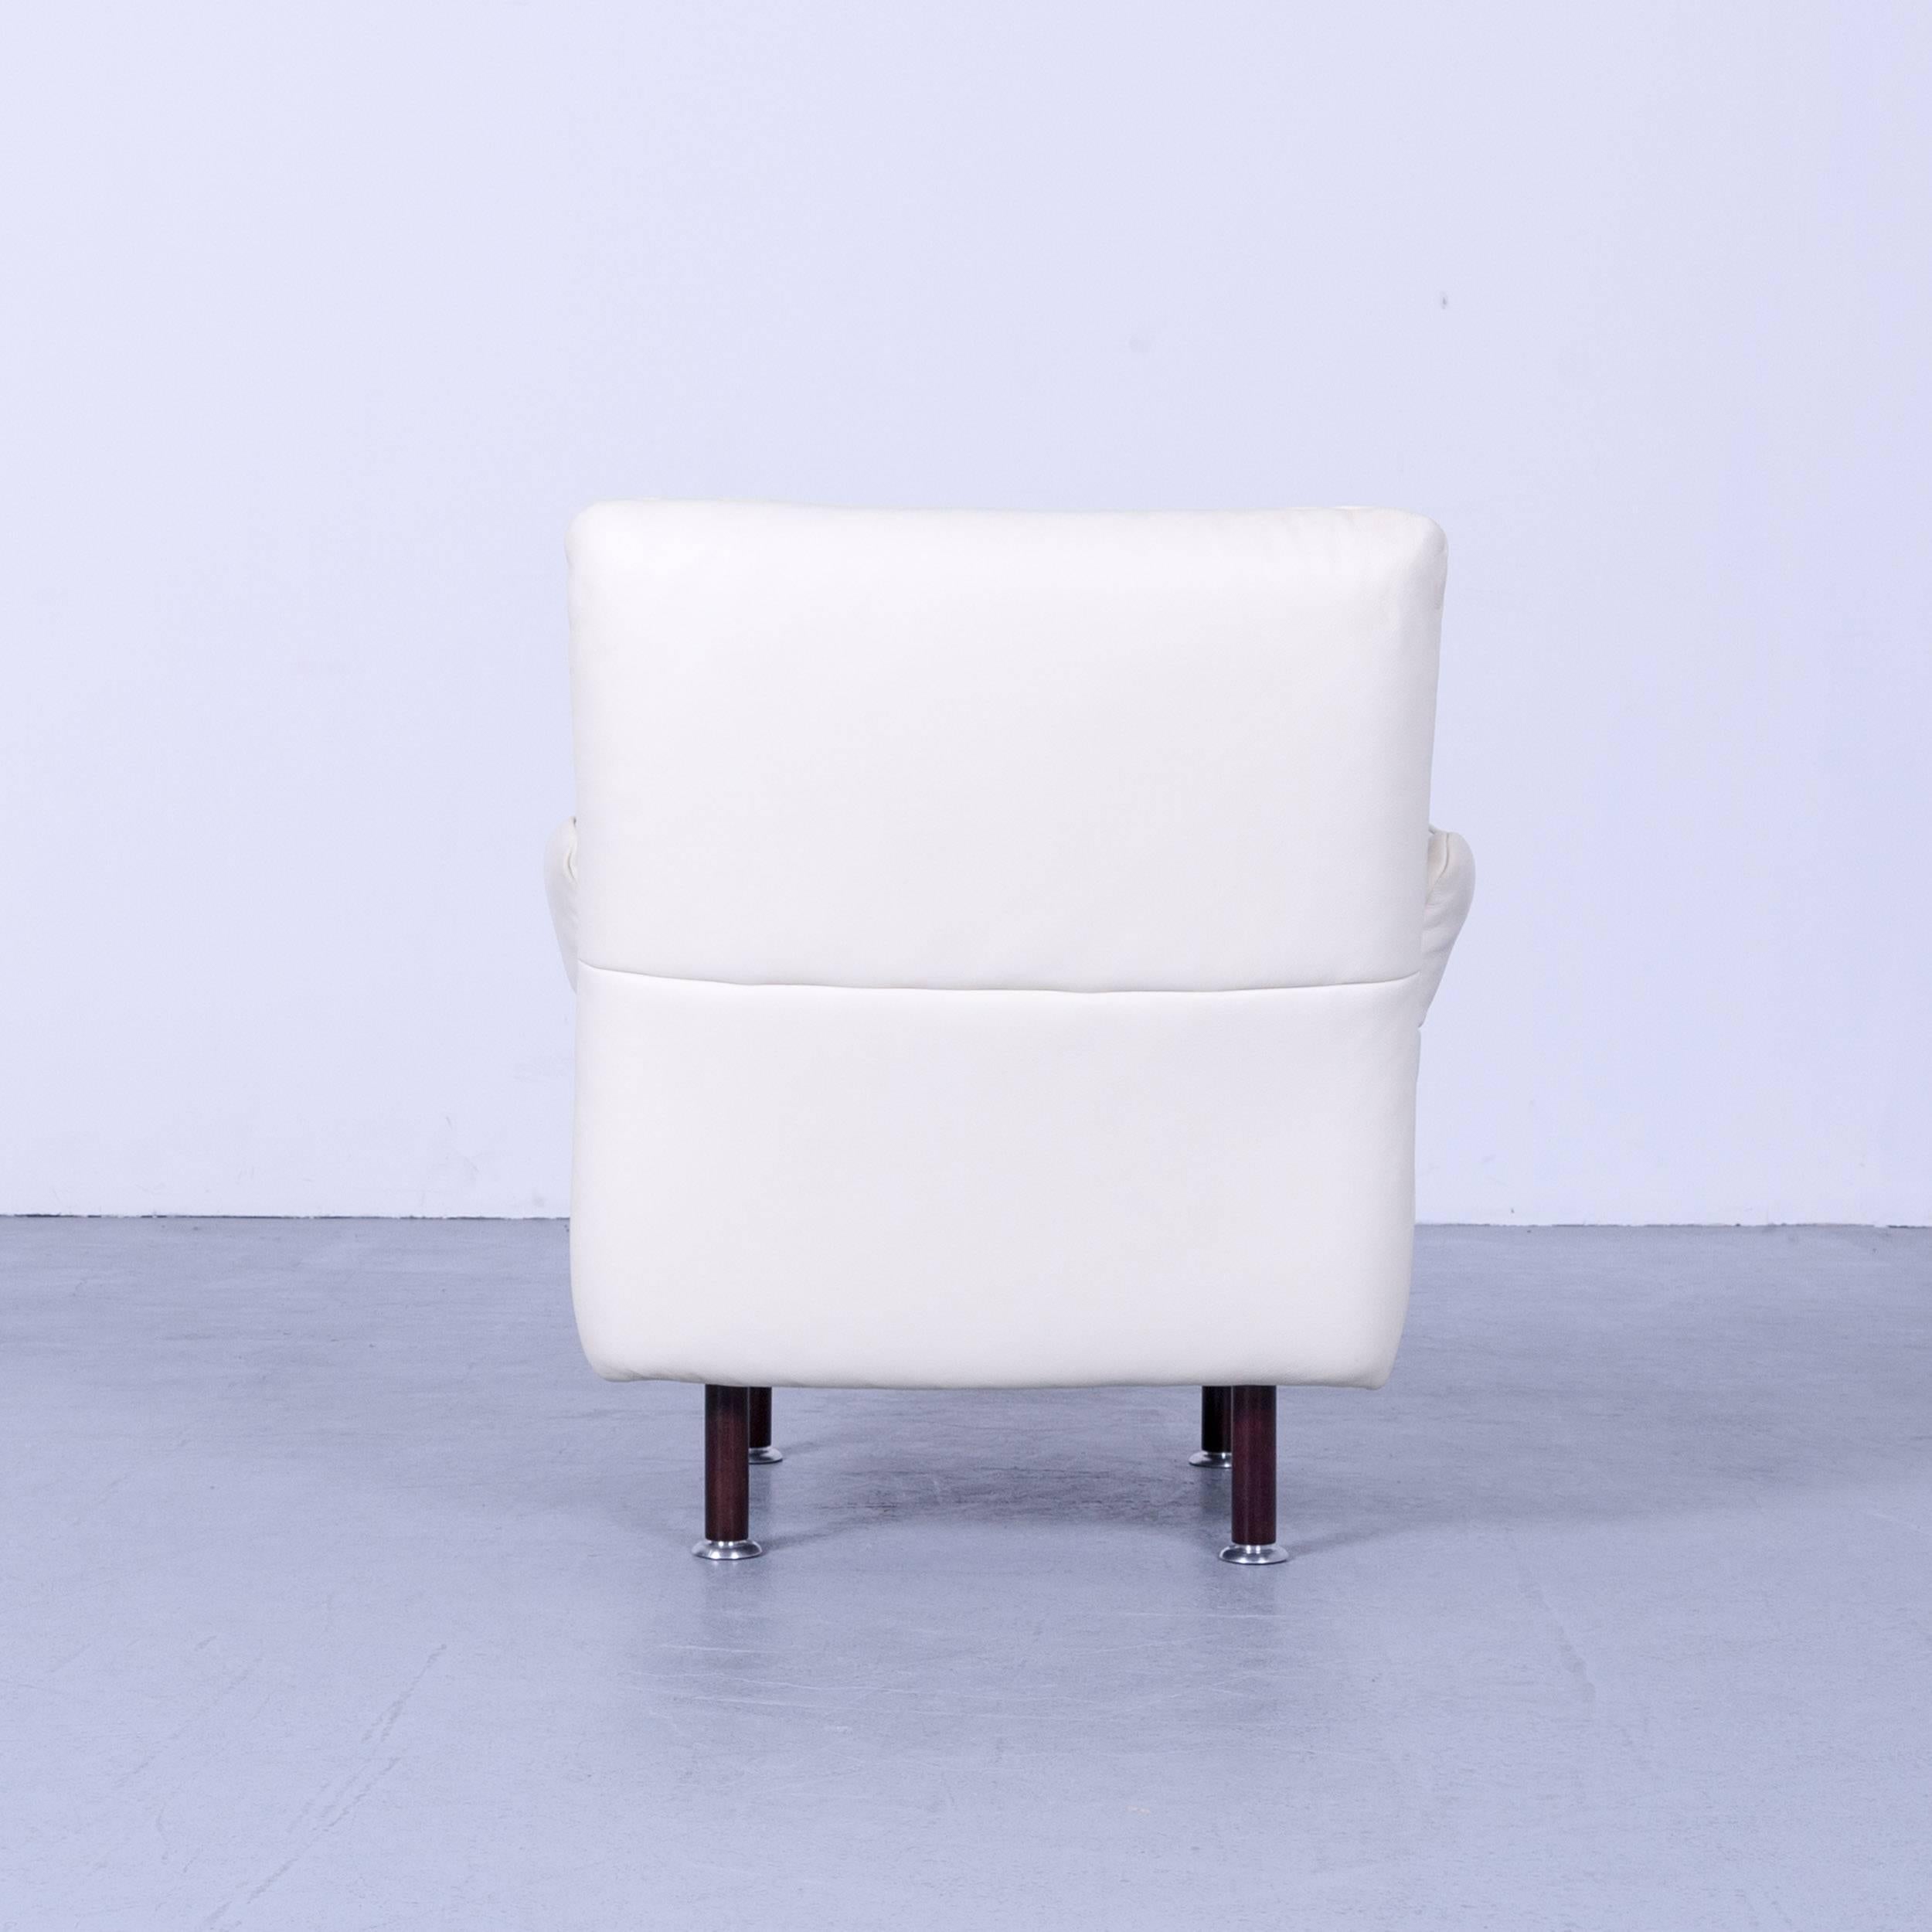 Contemporary Koinor Vittoria Designer Leather Armchair in Crème White with Functions